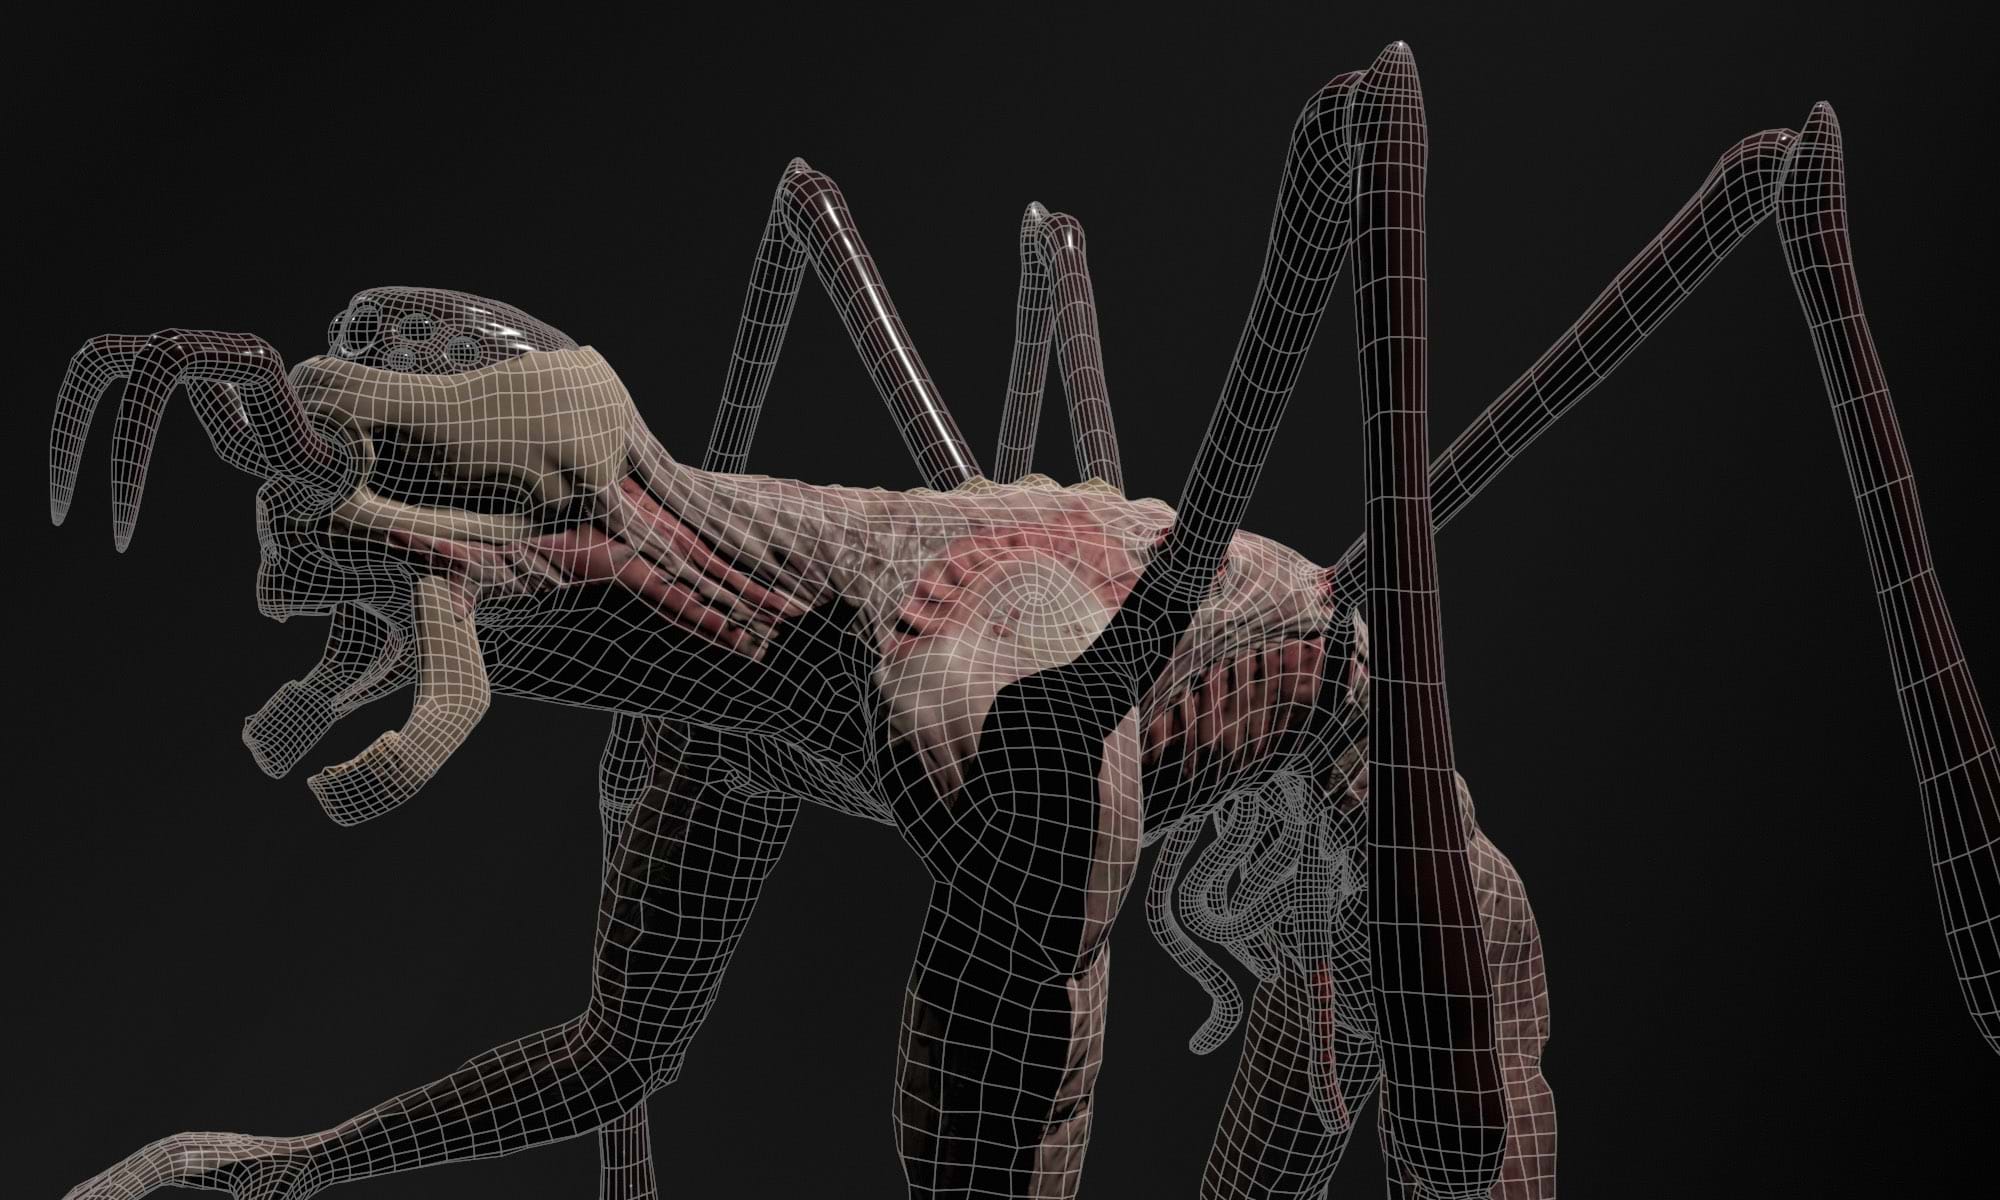 'Creating and Exploring Horror Through Creature Design' is a 2023 Digital Graduate Show project by Ewan Bruce, a Computer Arts student at Abertay University.